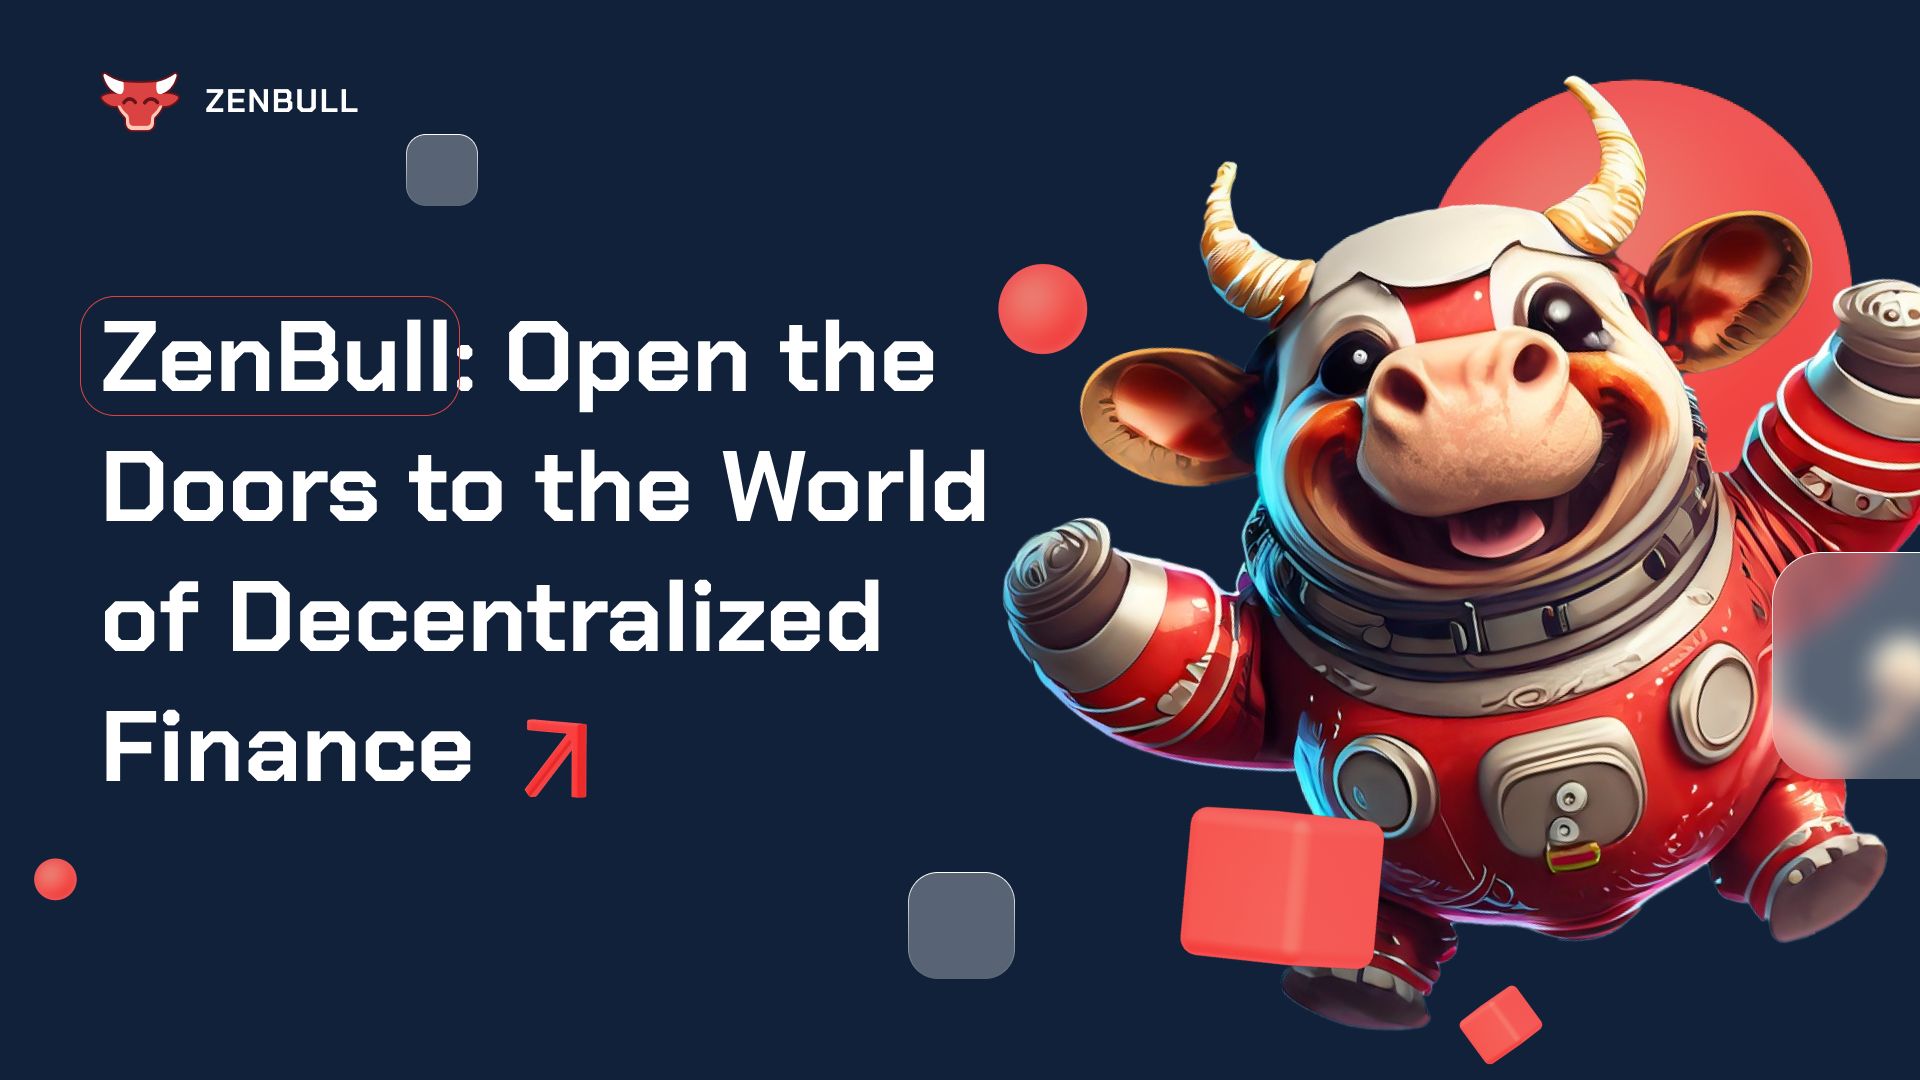 Open the Doors to the World of Decentralized Finance